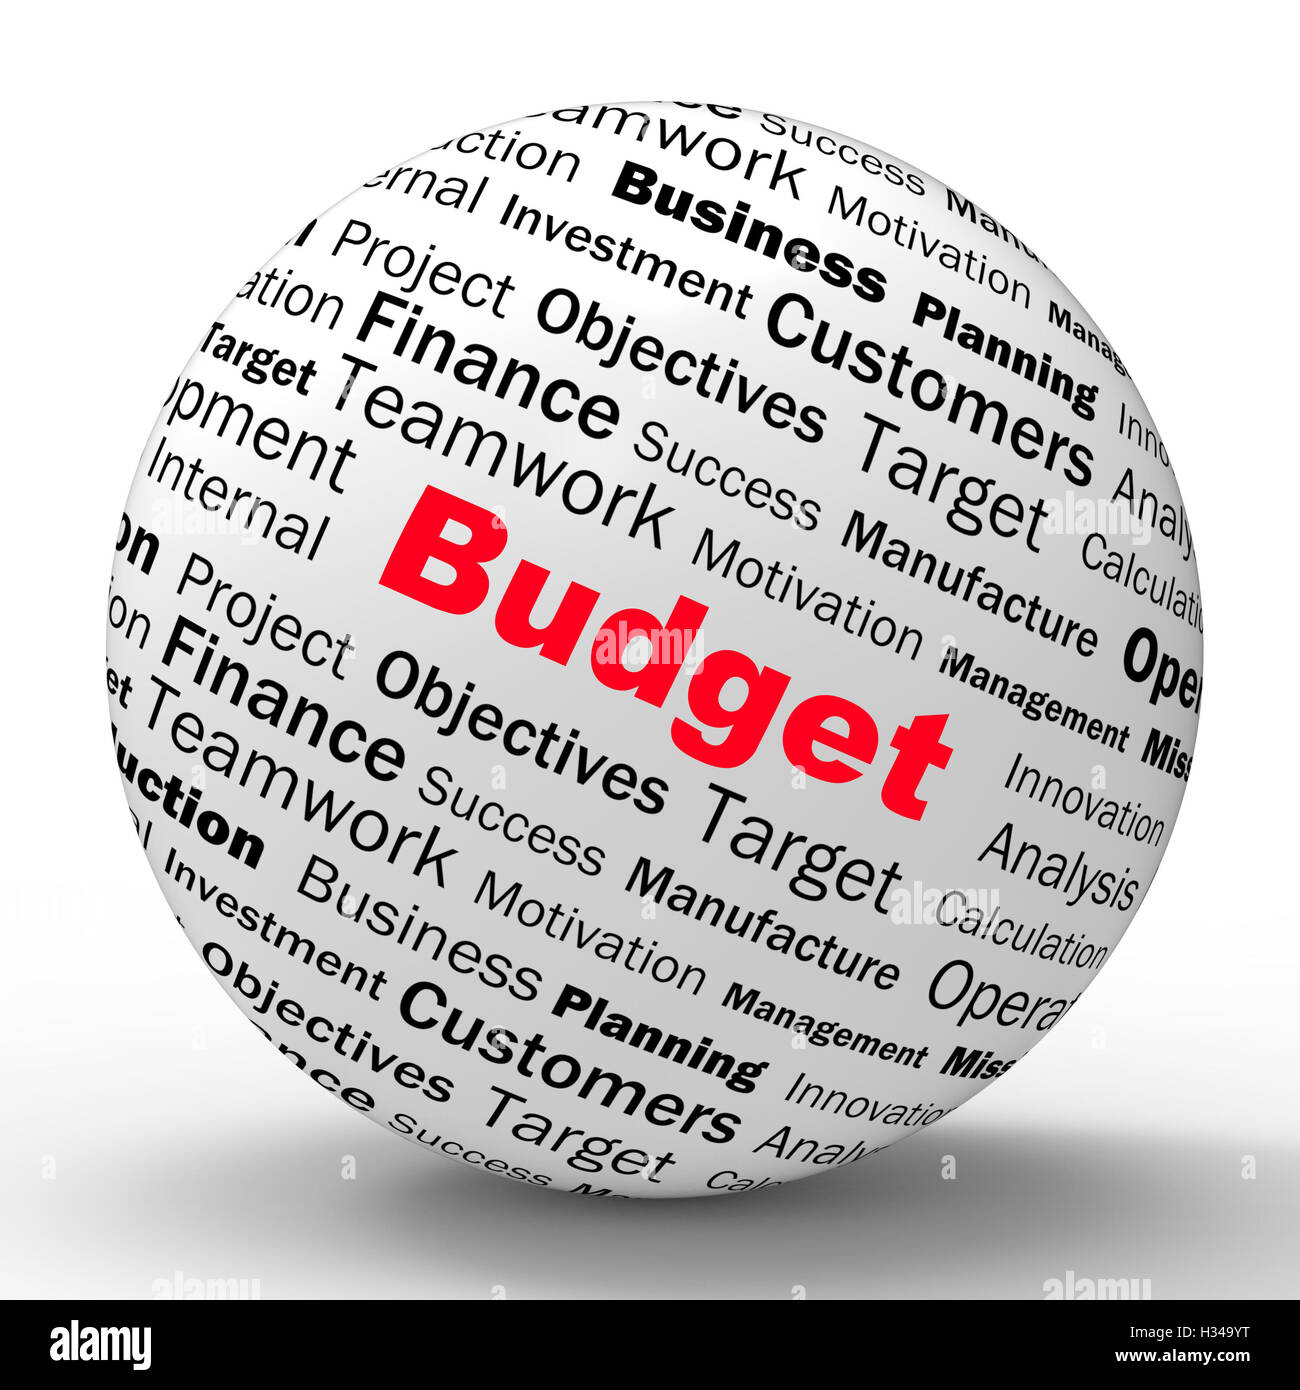 Budget Sphere Definition Shows Financial Management Or business Stock Photo